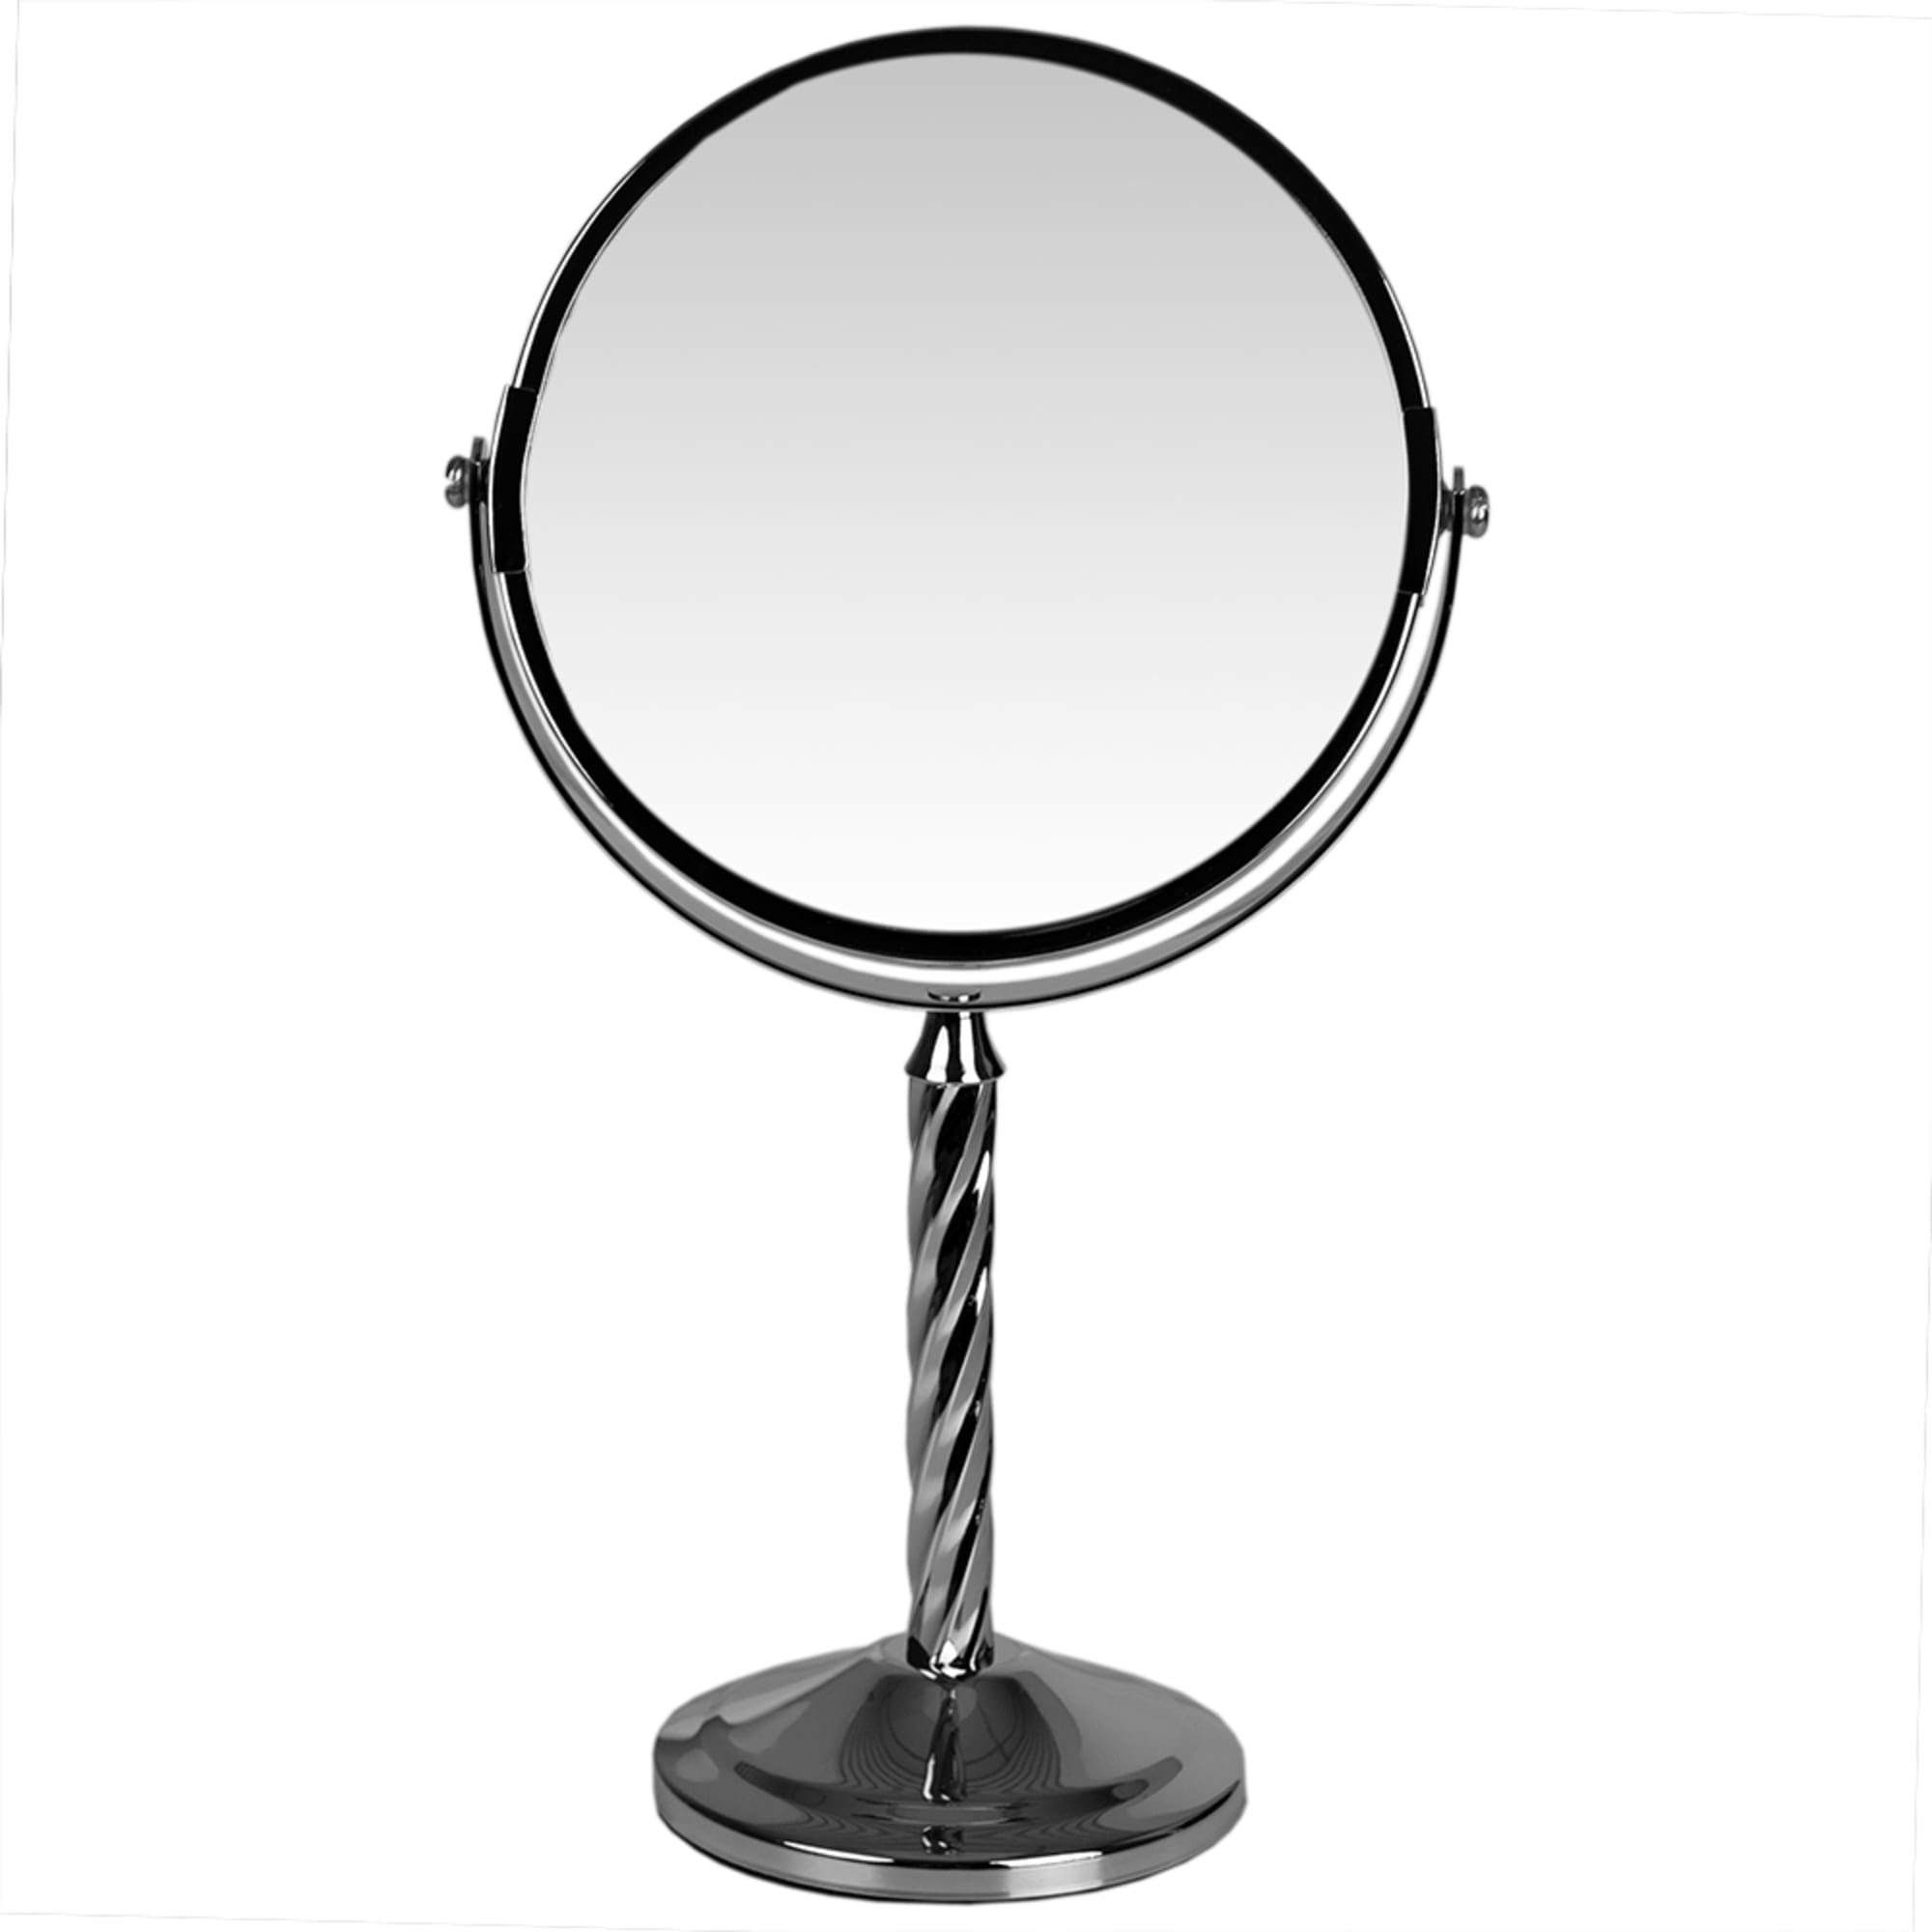 Home Basics Spiral Double Sided Cosmetic Mirror, Chrome $10.00 EACH, CASE PACK OF 6